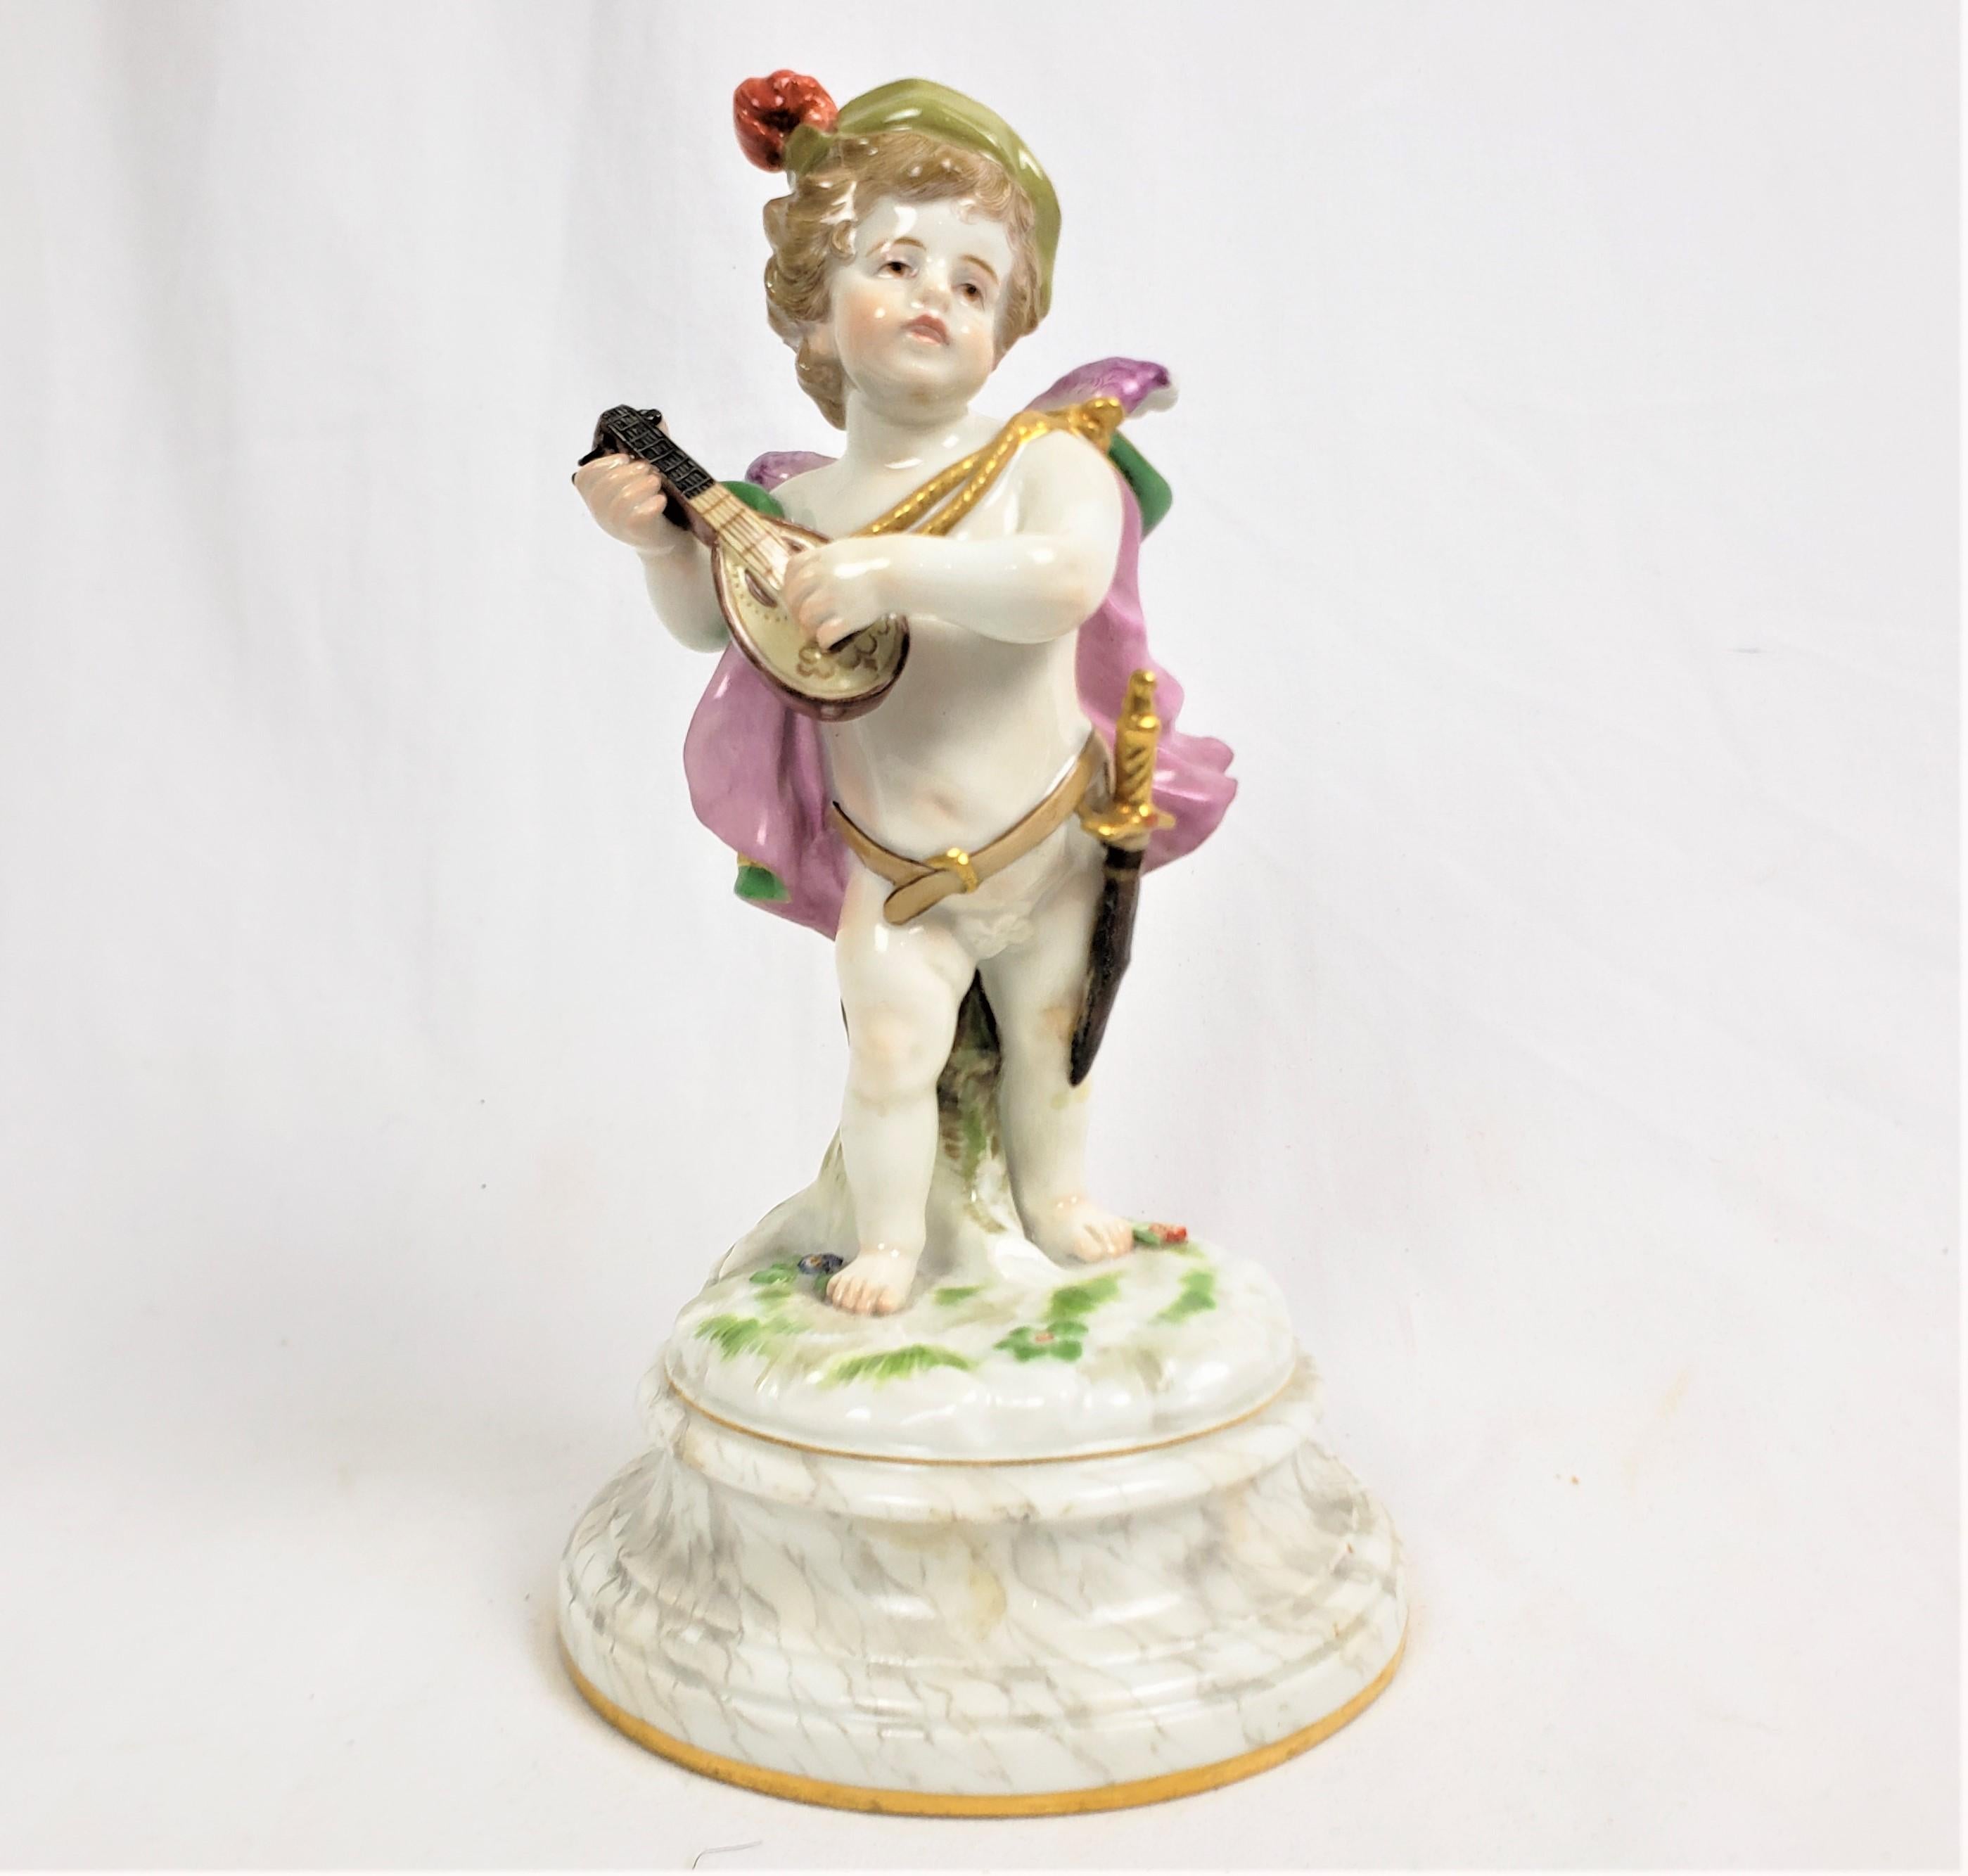 Antique Meissen Porcelain Figurine of a Child Playing a Lute In Good Condition For Sale In Hamilton, Ontario